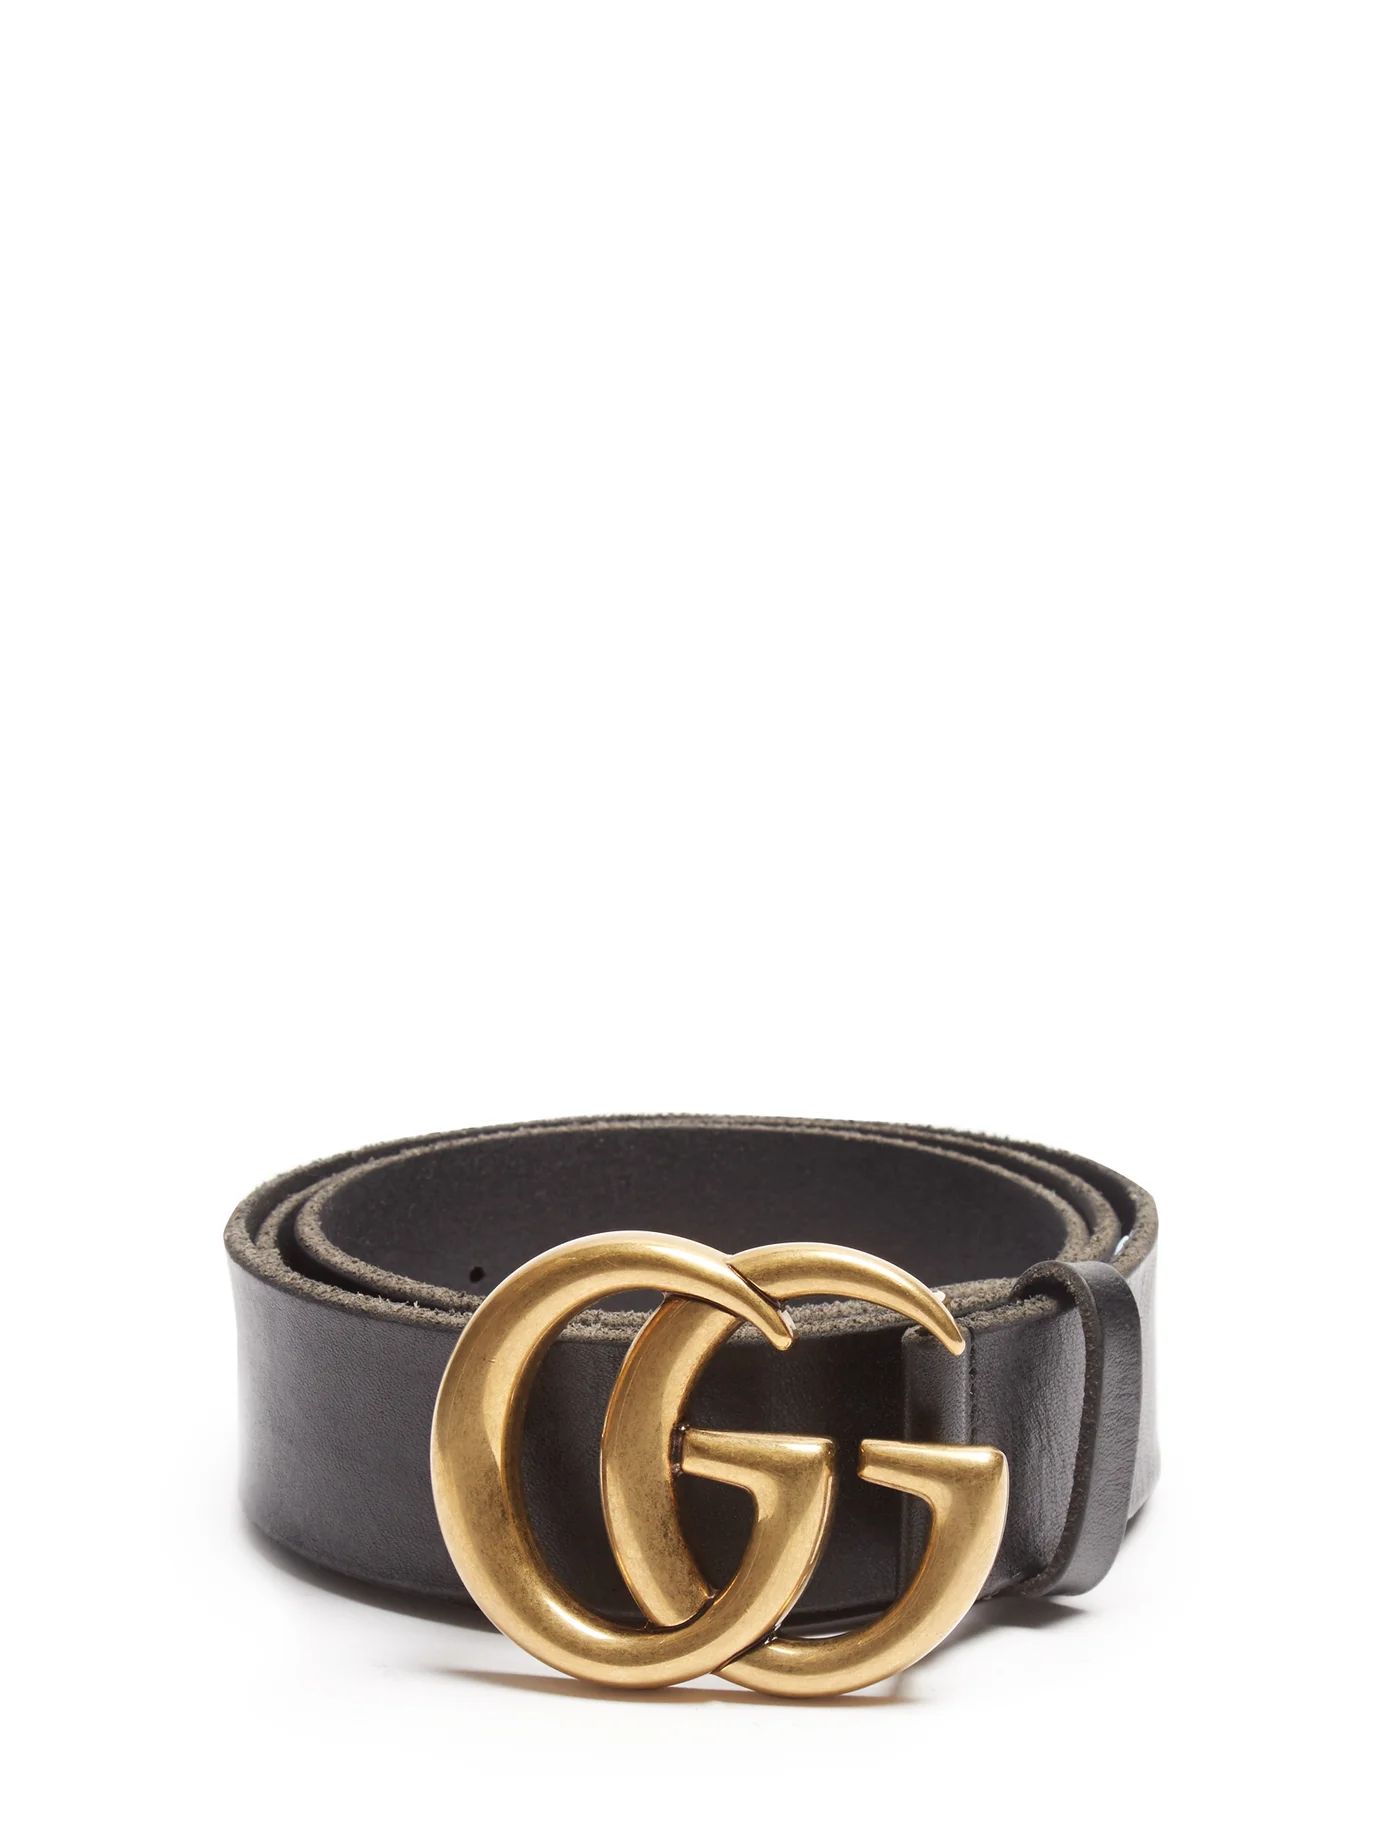 GG leather belt | Matches (US)